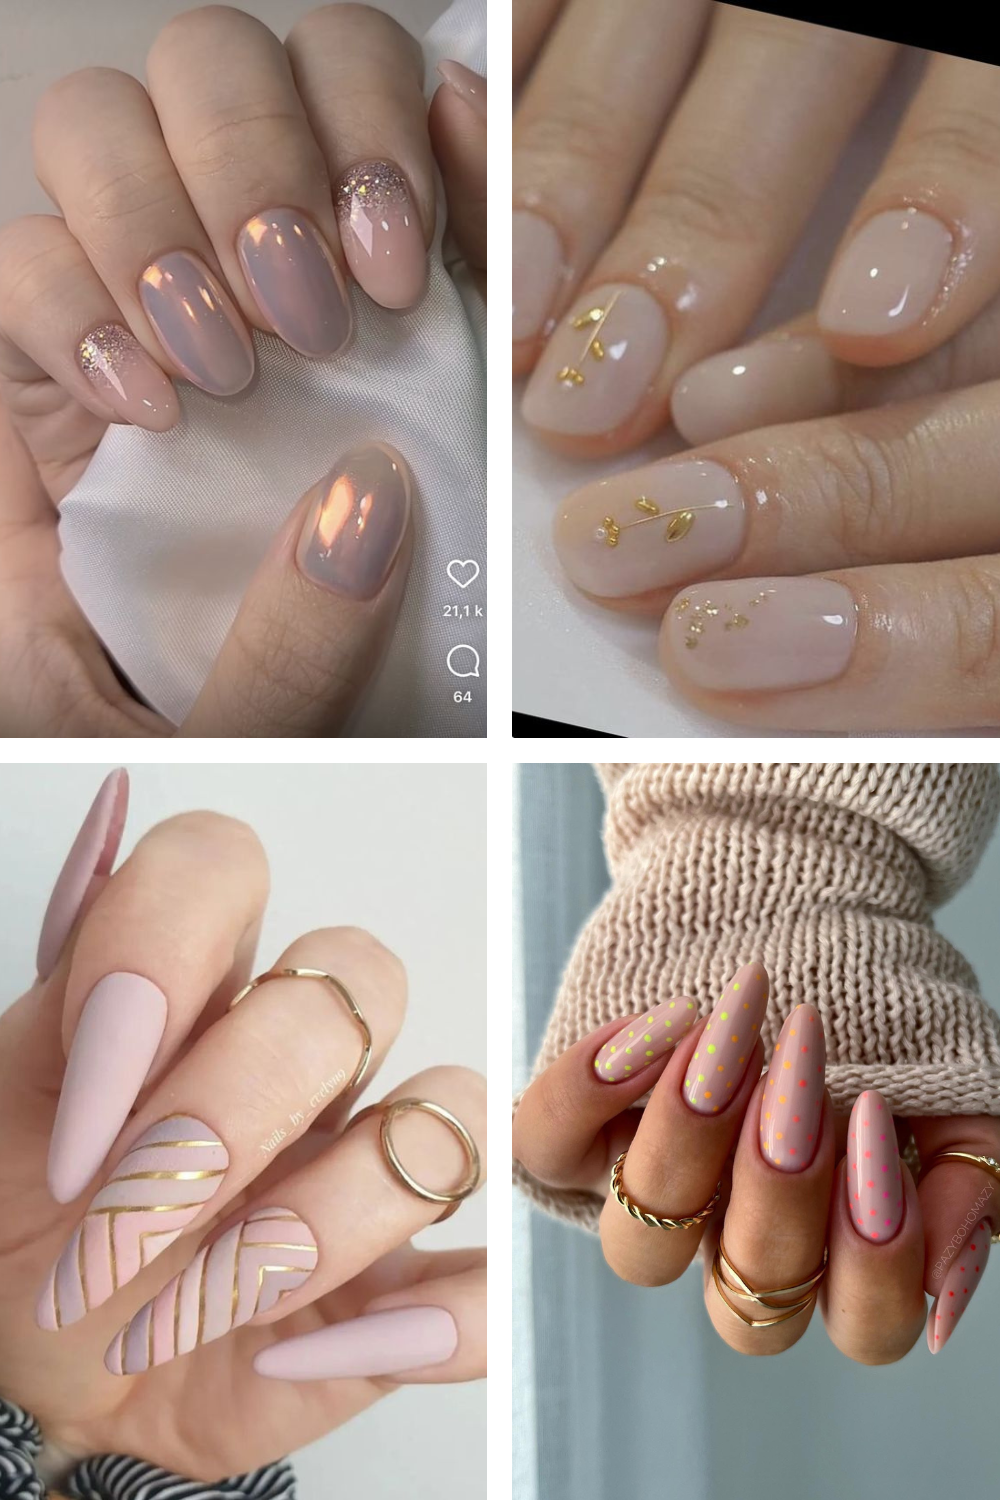 46 Nude Nails That Are Chic & Classy!